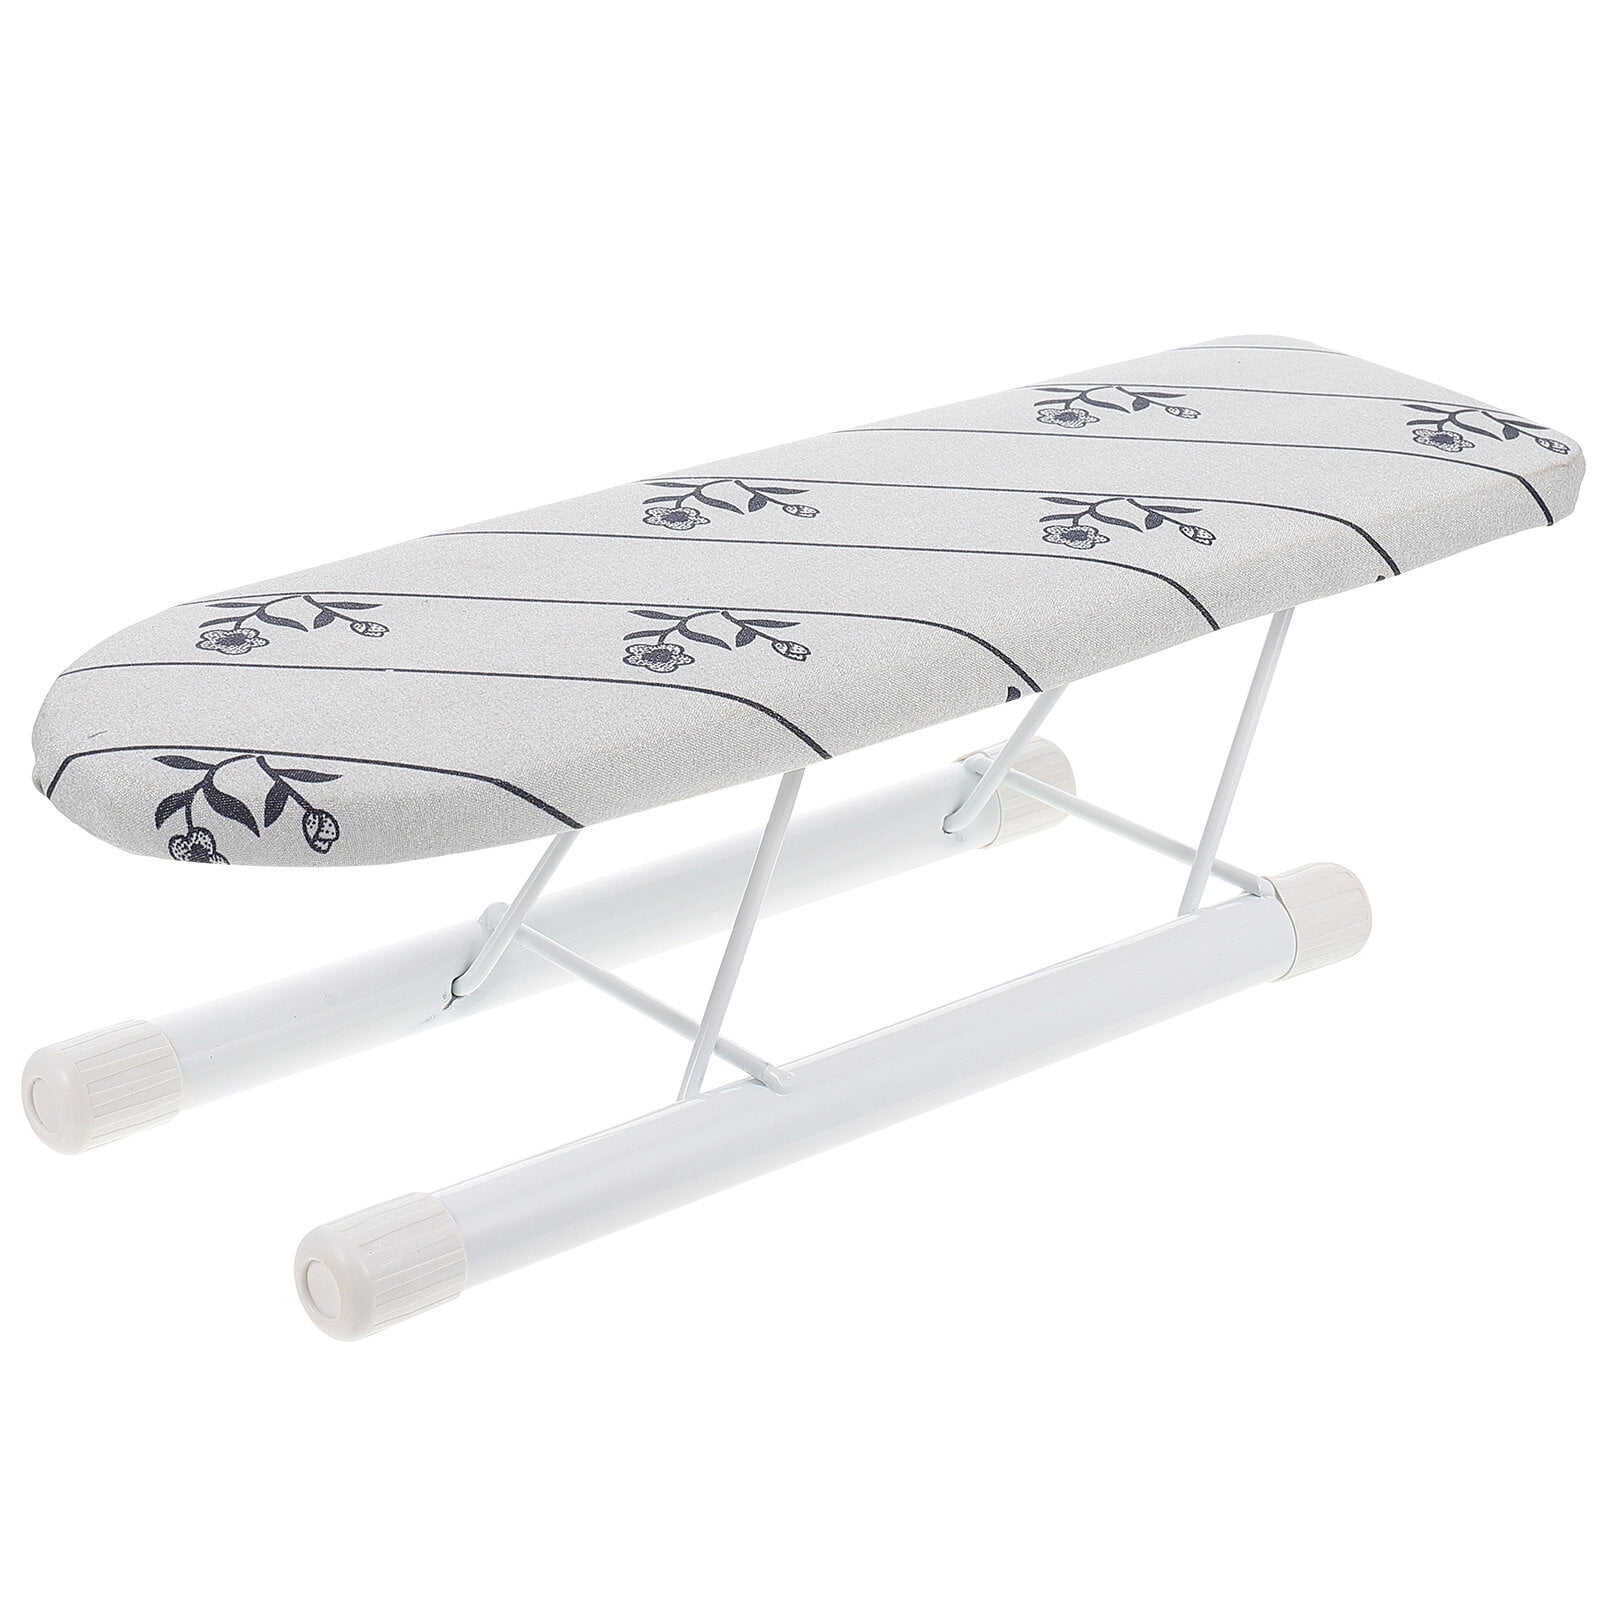 Ironing Board,mini Small Folding Ironing Board Tabletop Ironing Board  Sleeve Cuffs Collar Ironing Board For Home Travel Use Grid Classic[f]